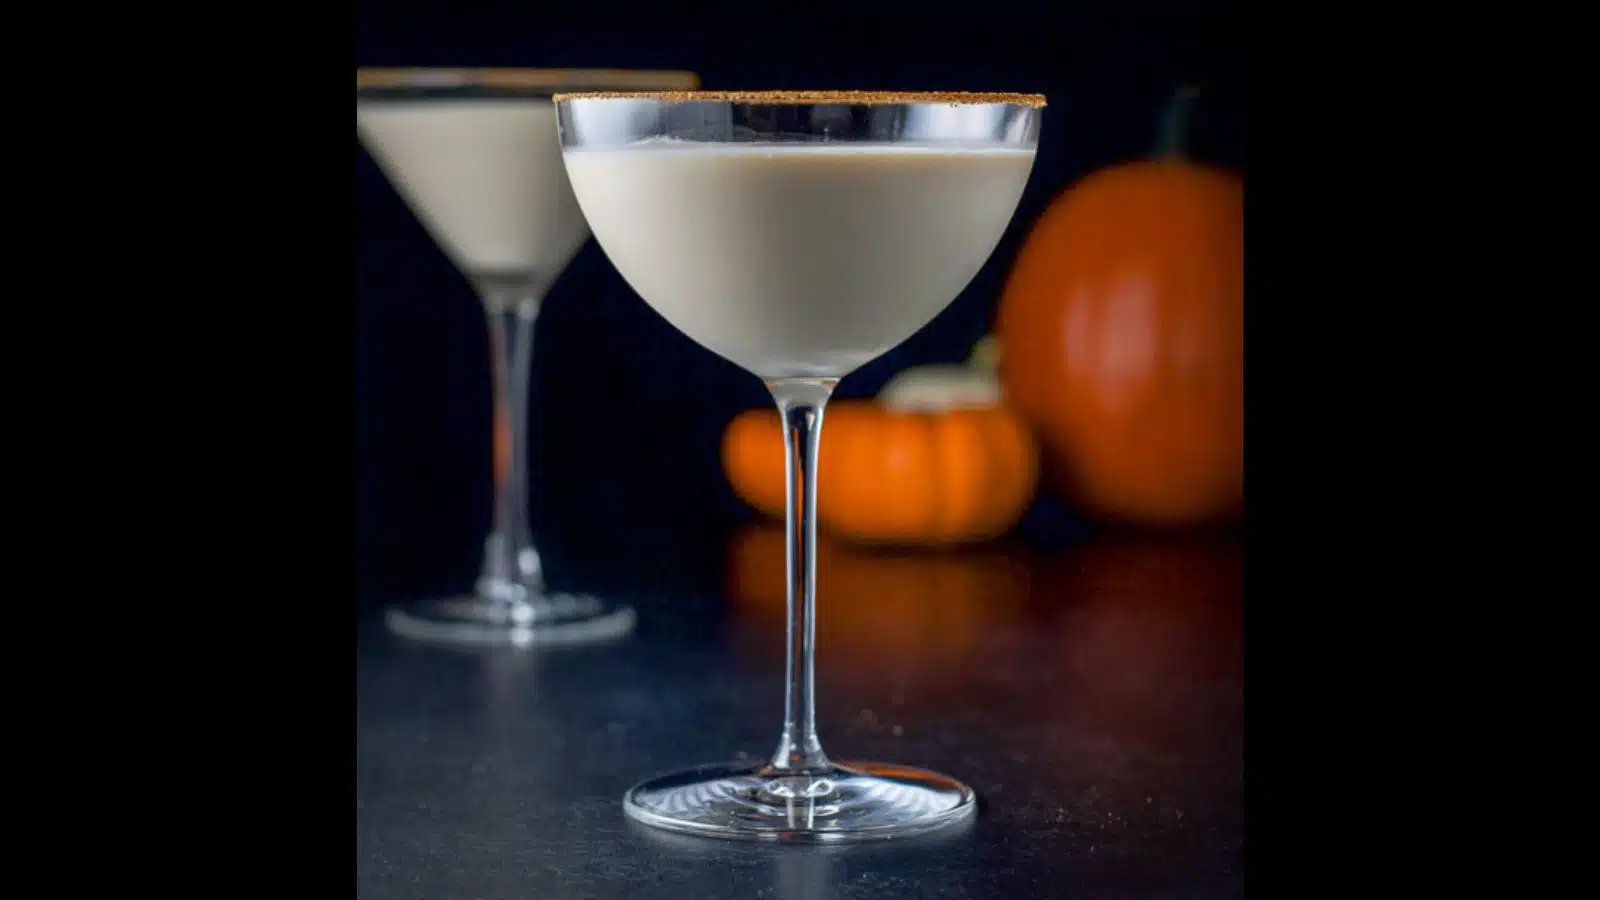 Two martini glasses filled with the cream cocktail with pumpkin spice on the rims and pumpkins in the background